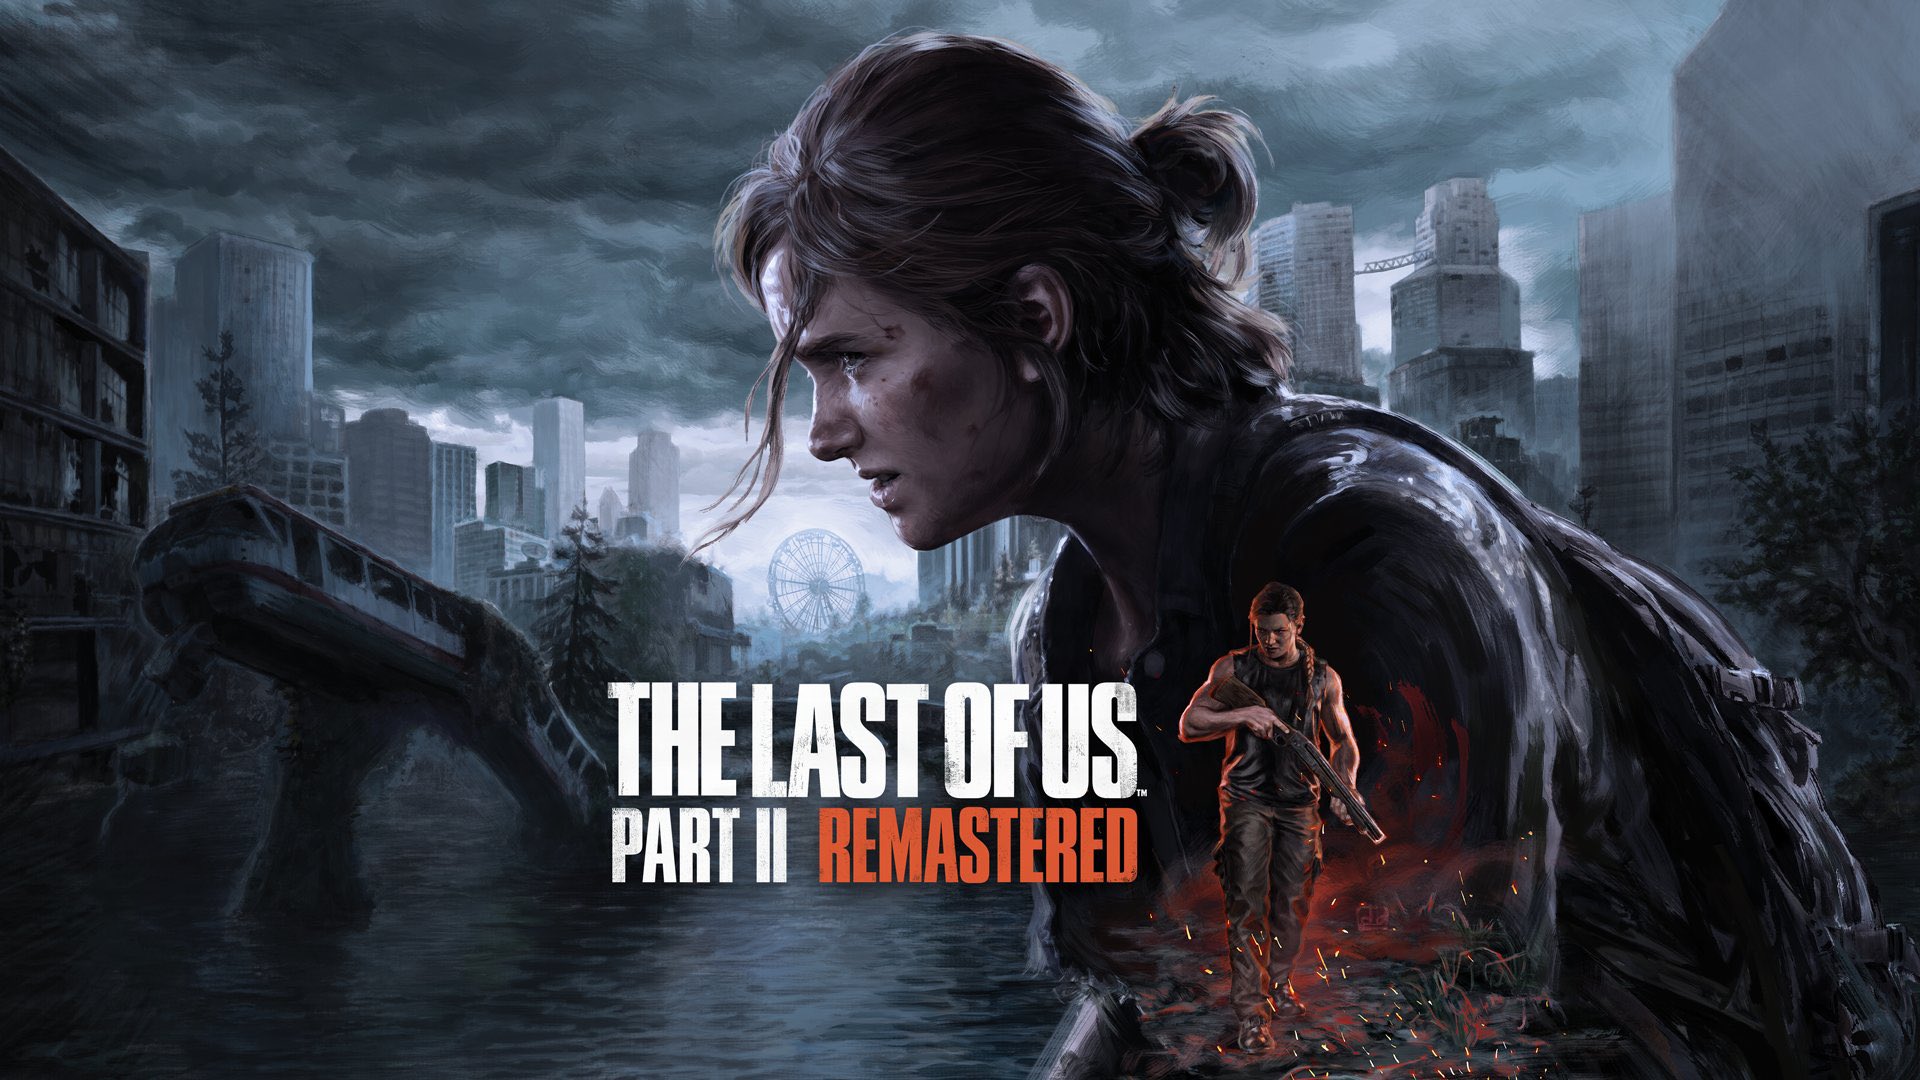 Despite the Graphics, the Remastered is better than Part 1! : r/thelastofus